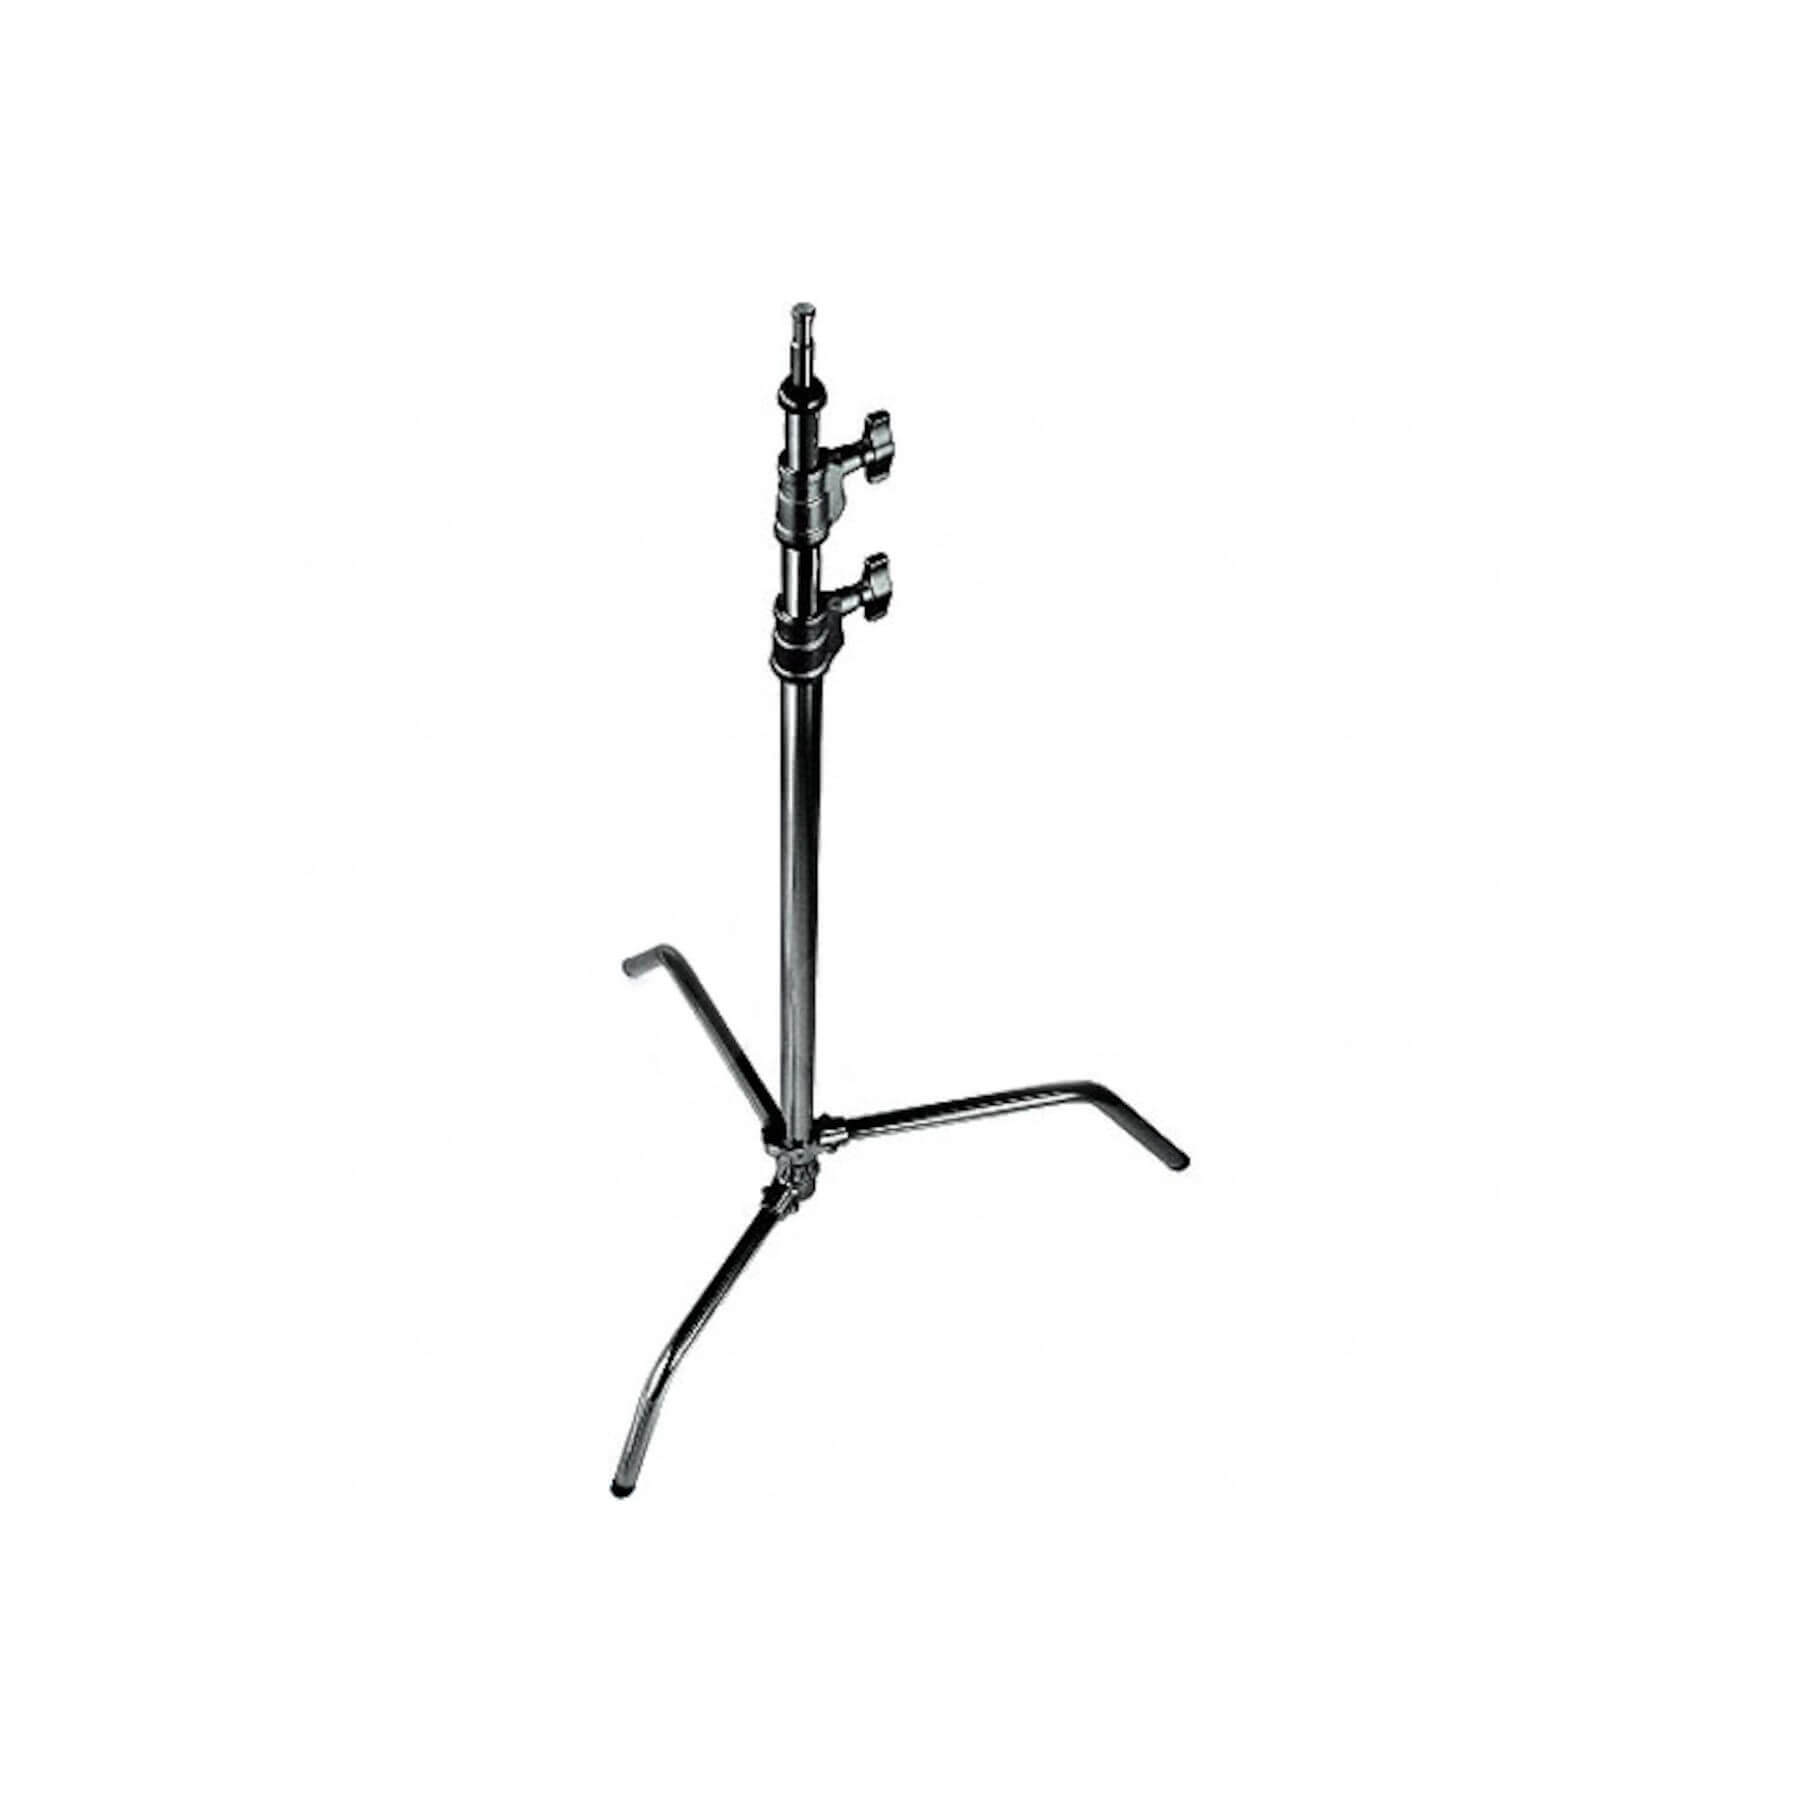 AVENGER Photo/ Video Light Stand 40 C -Stand A2033FCB, Black